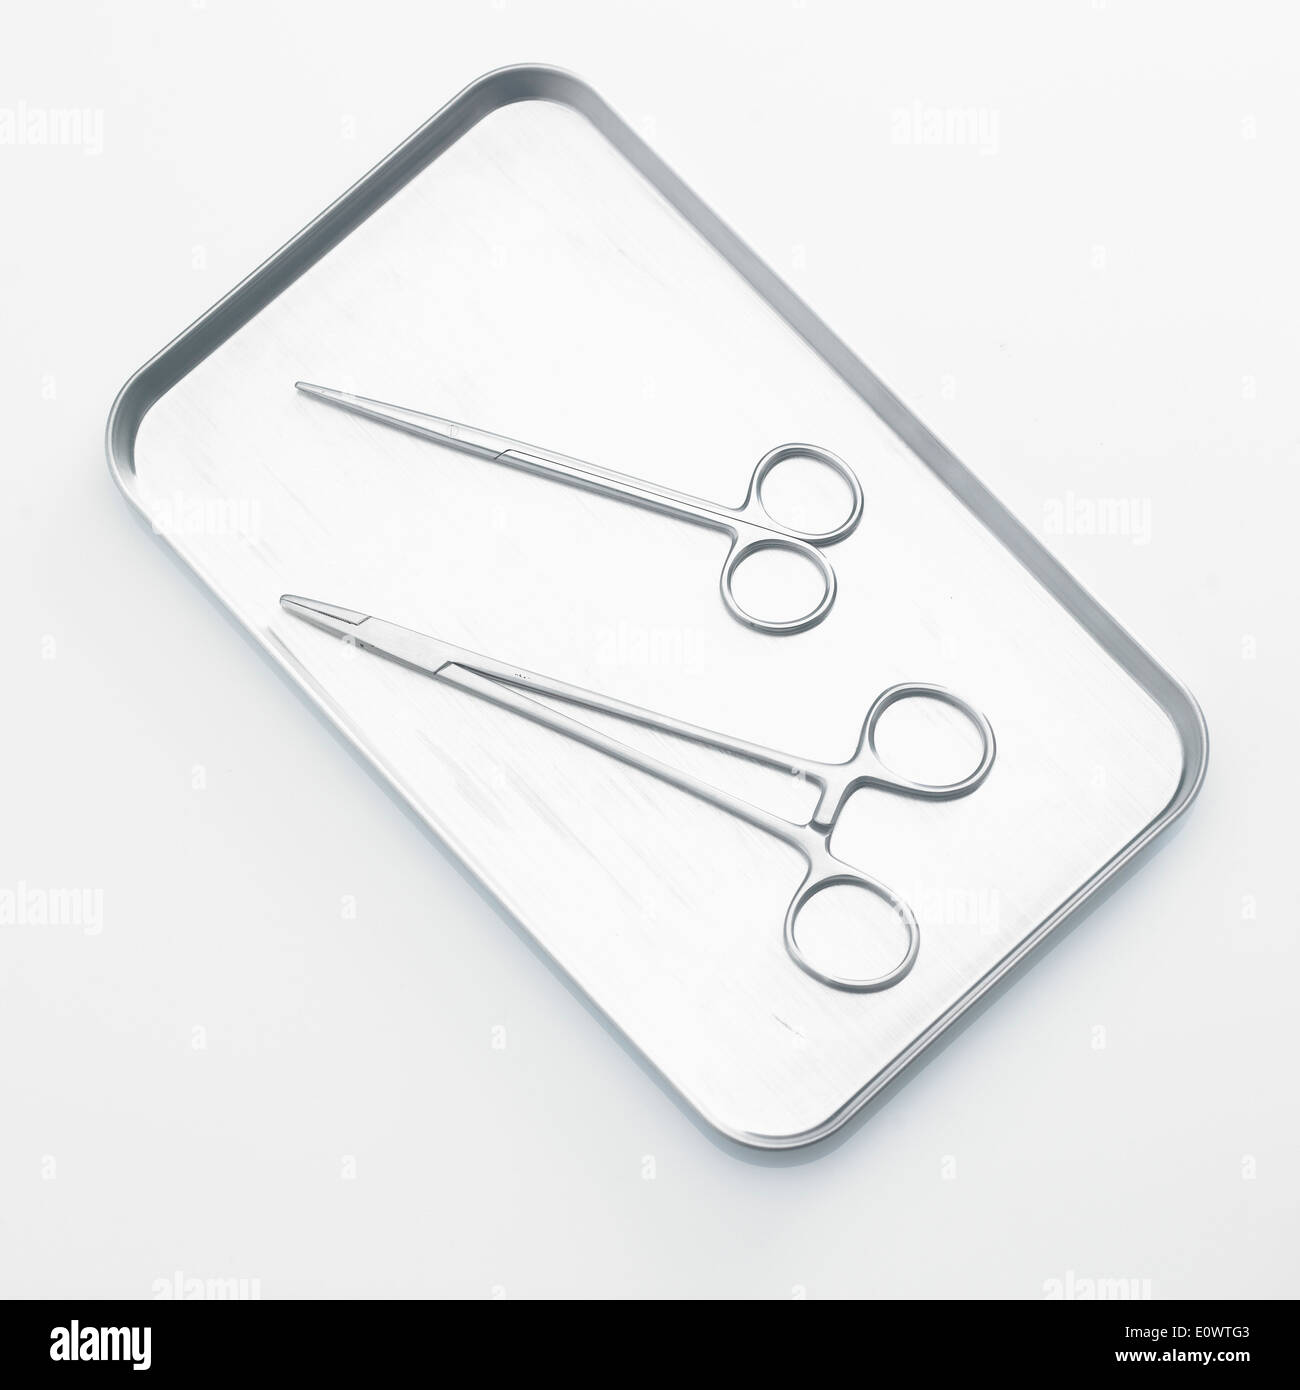 two surgical scissors Stock Photo